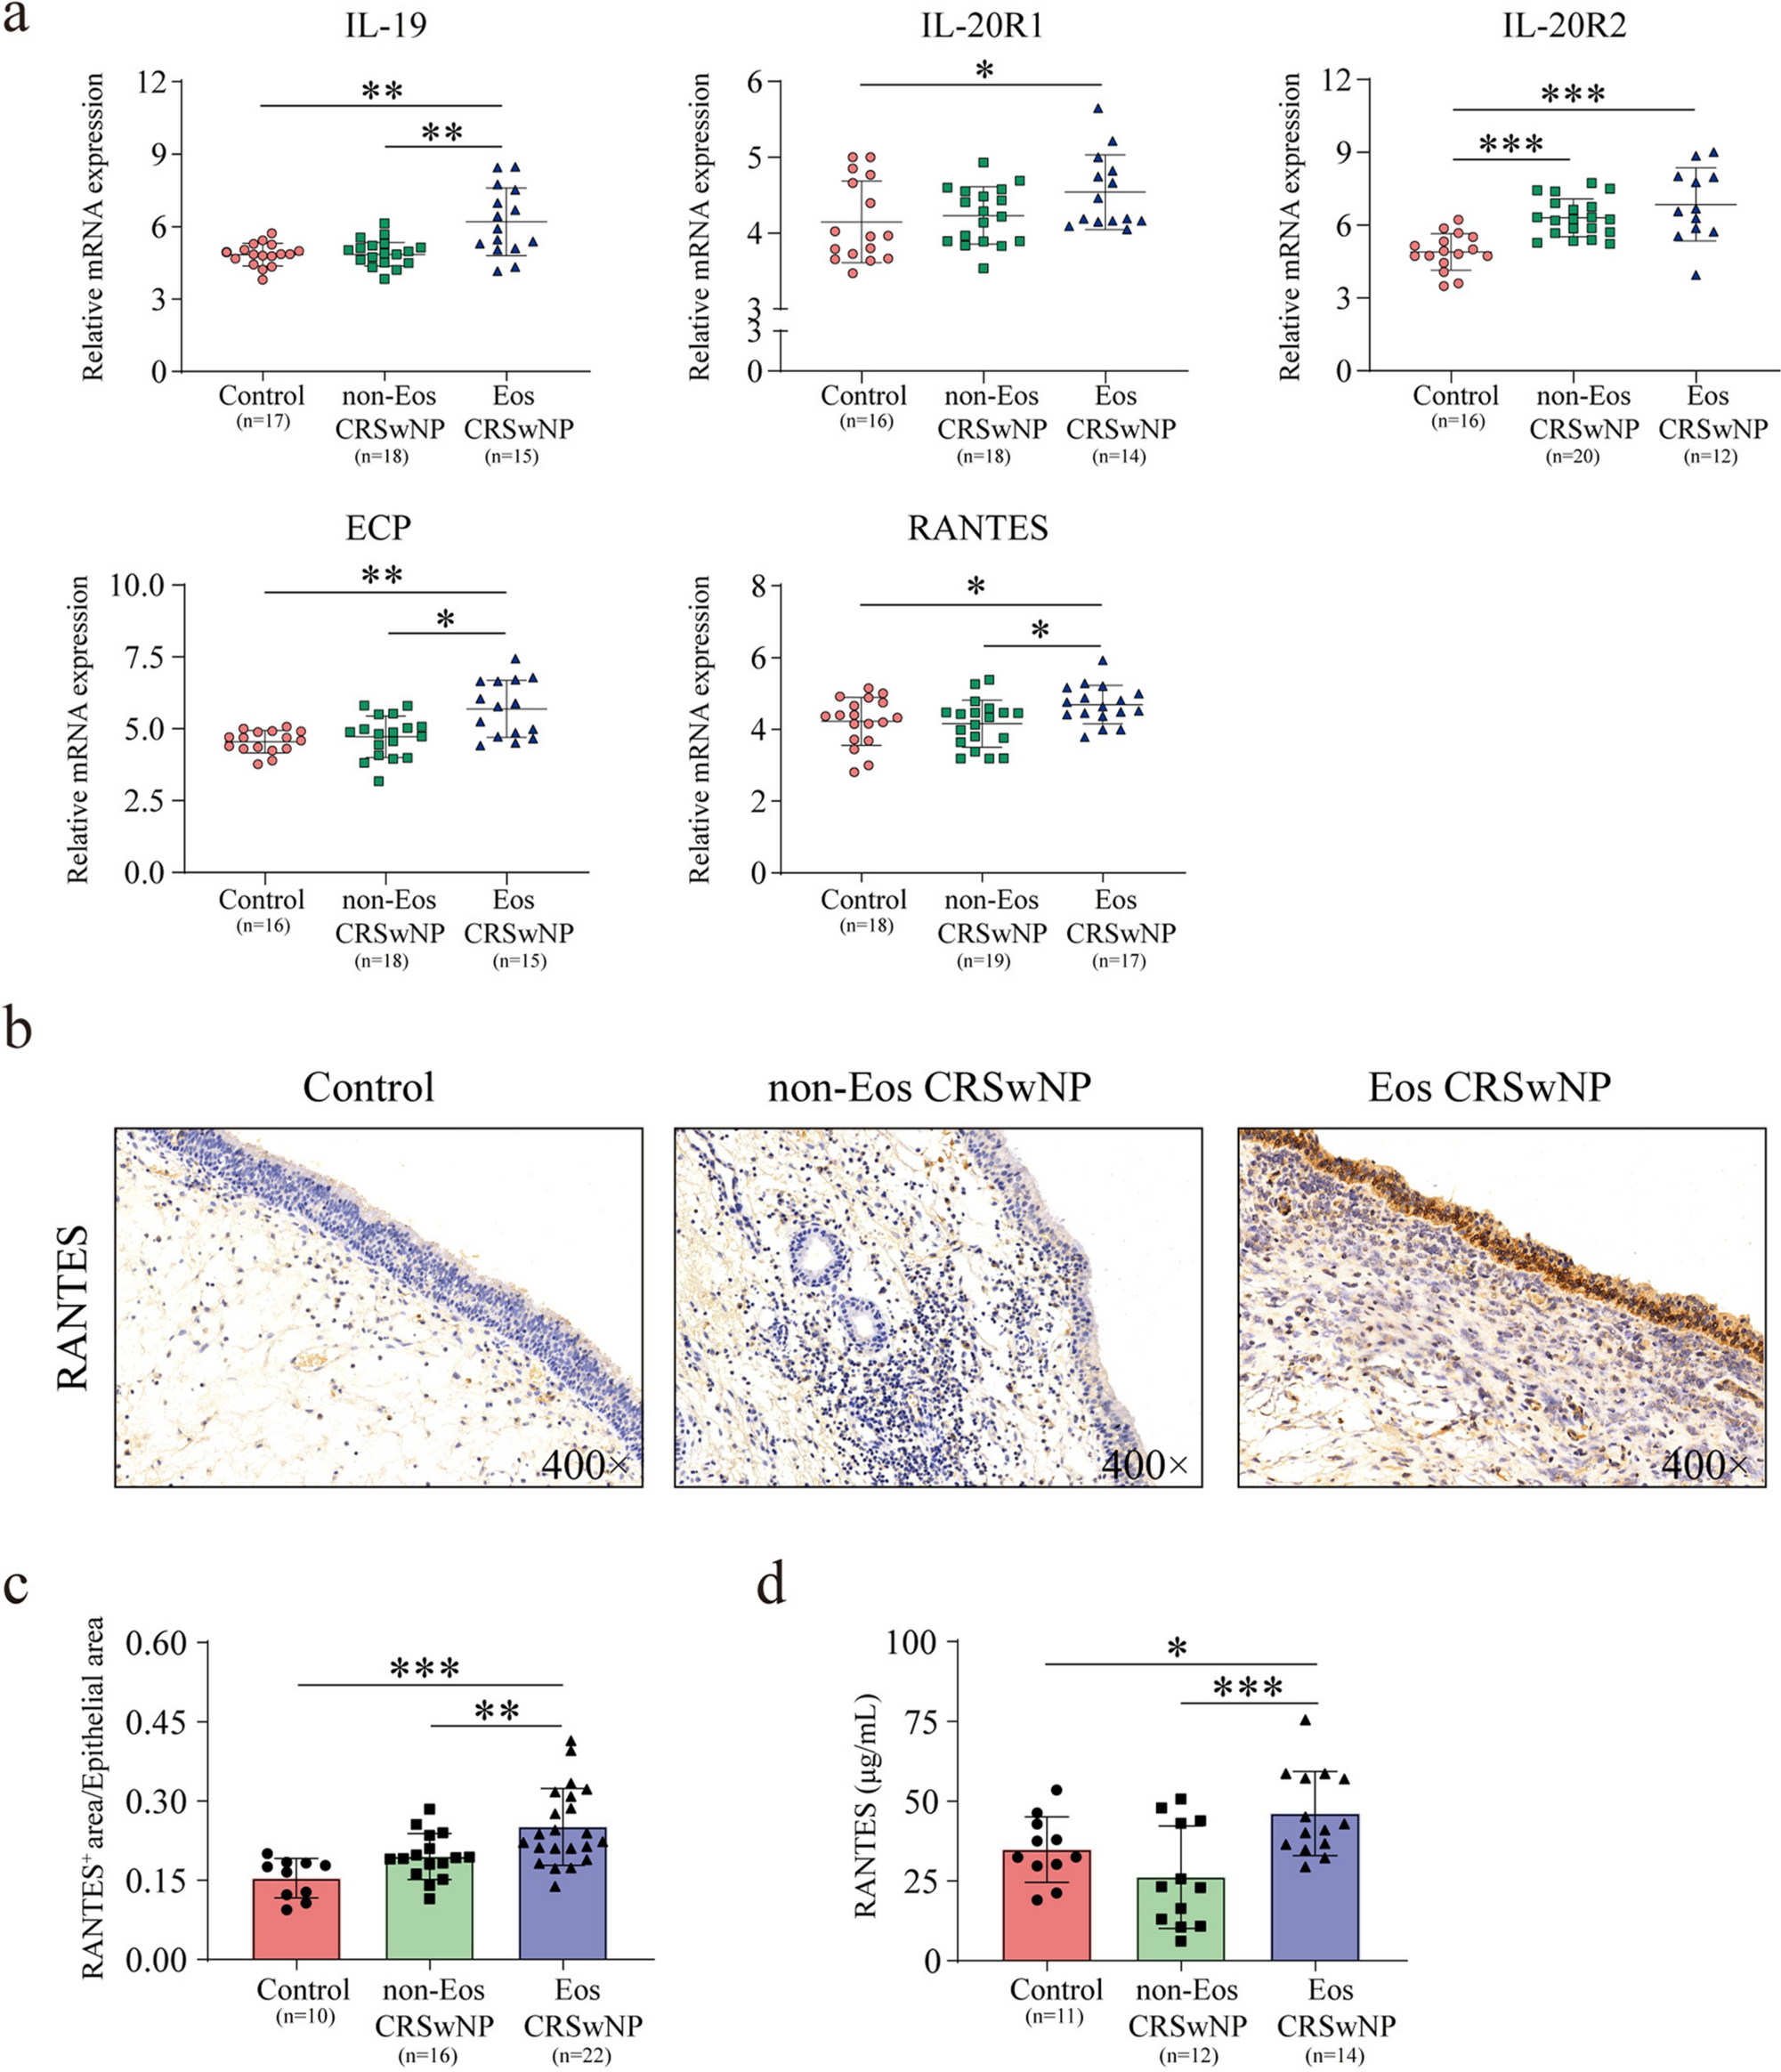 Interleukin-19 enhances eosinophil infiltration through upregulation of epithelium-derived RANTES expression via the ERK/NF-κB signalling pathway in patients with eosinophilic CRSwNP